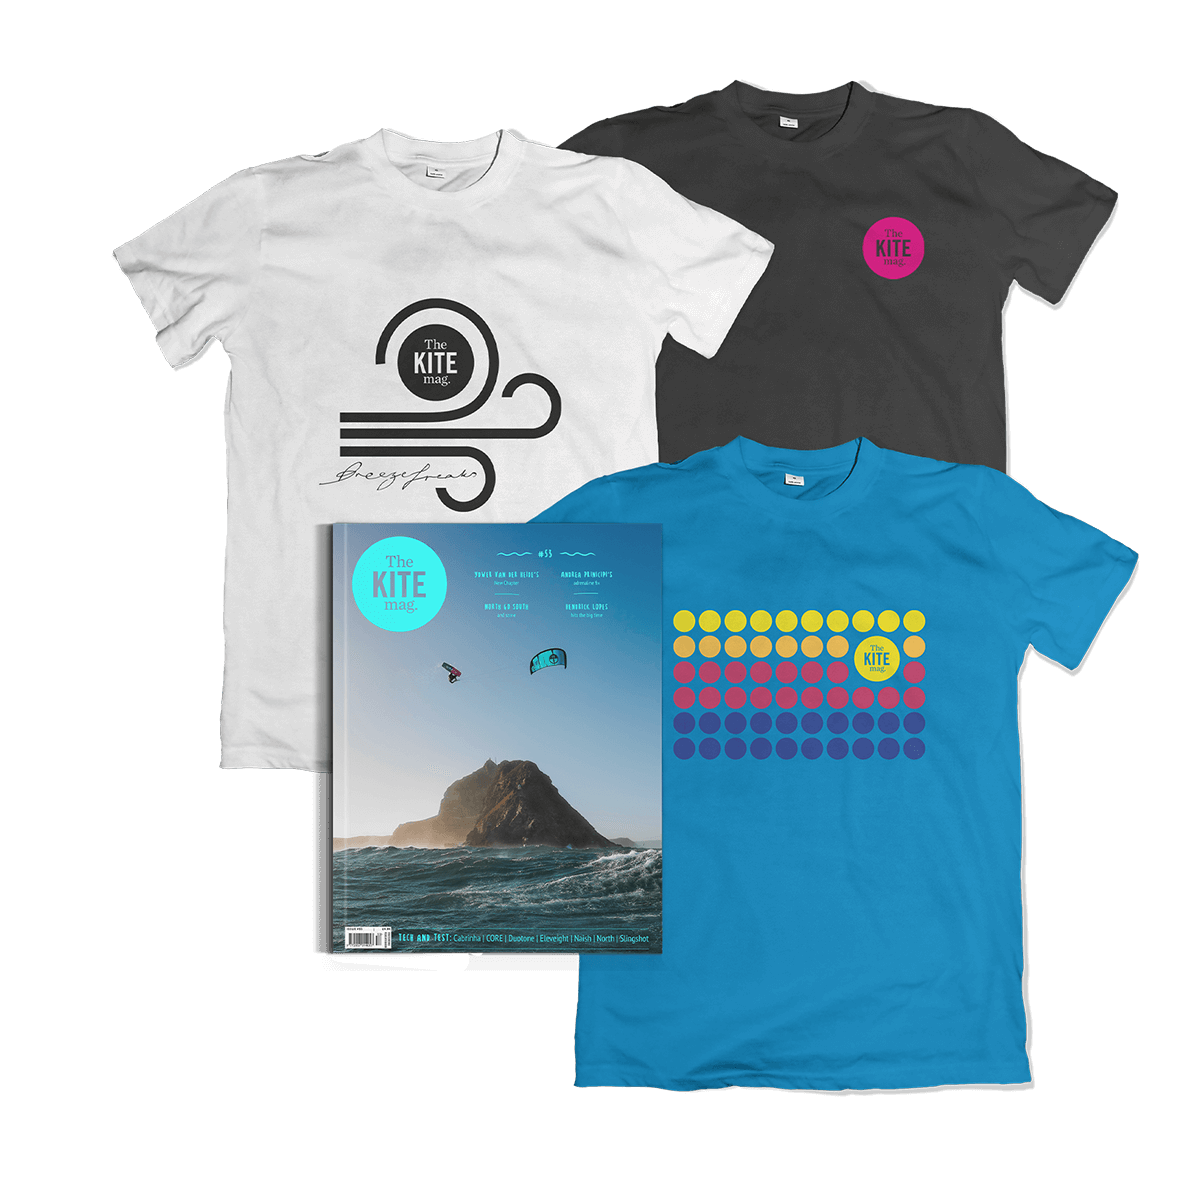 TKM 53 subscribe bundle 1200 1 - Tell me about it: Airush Surf Series